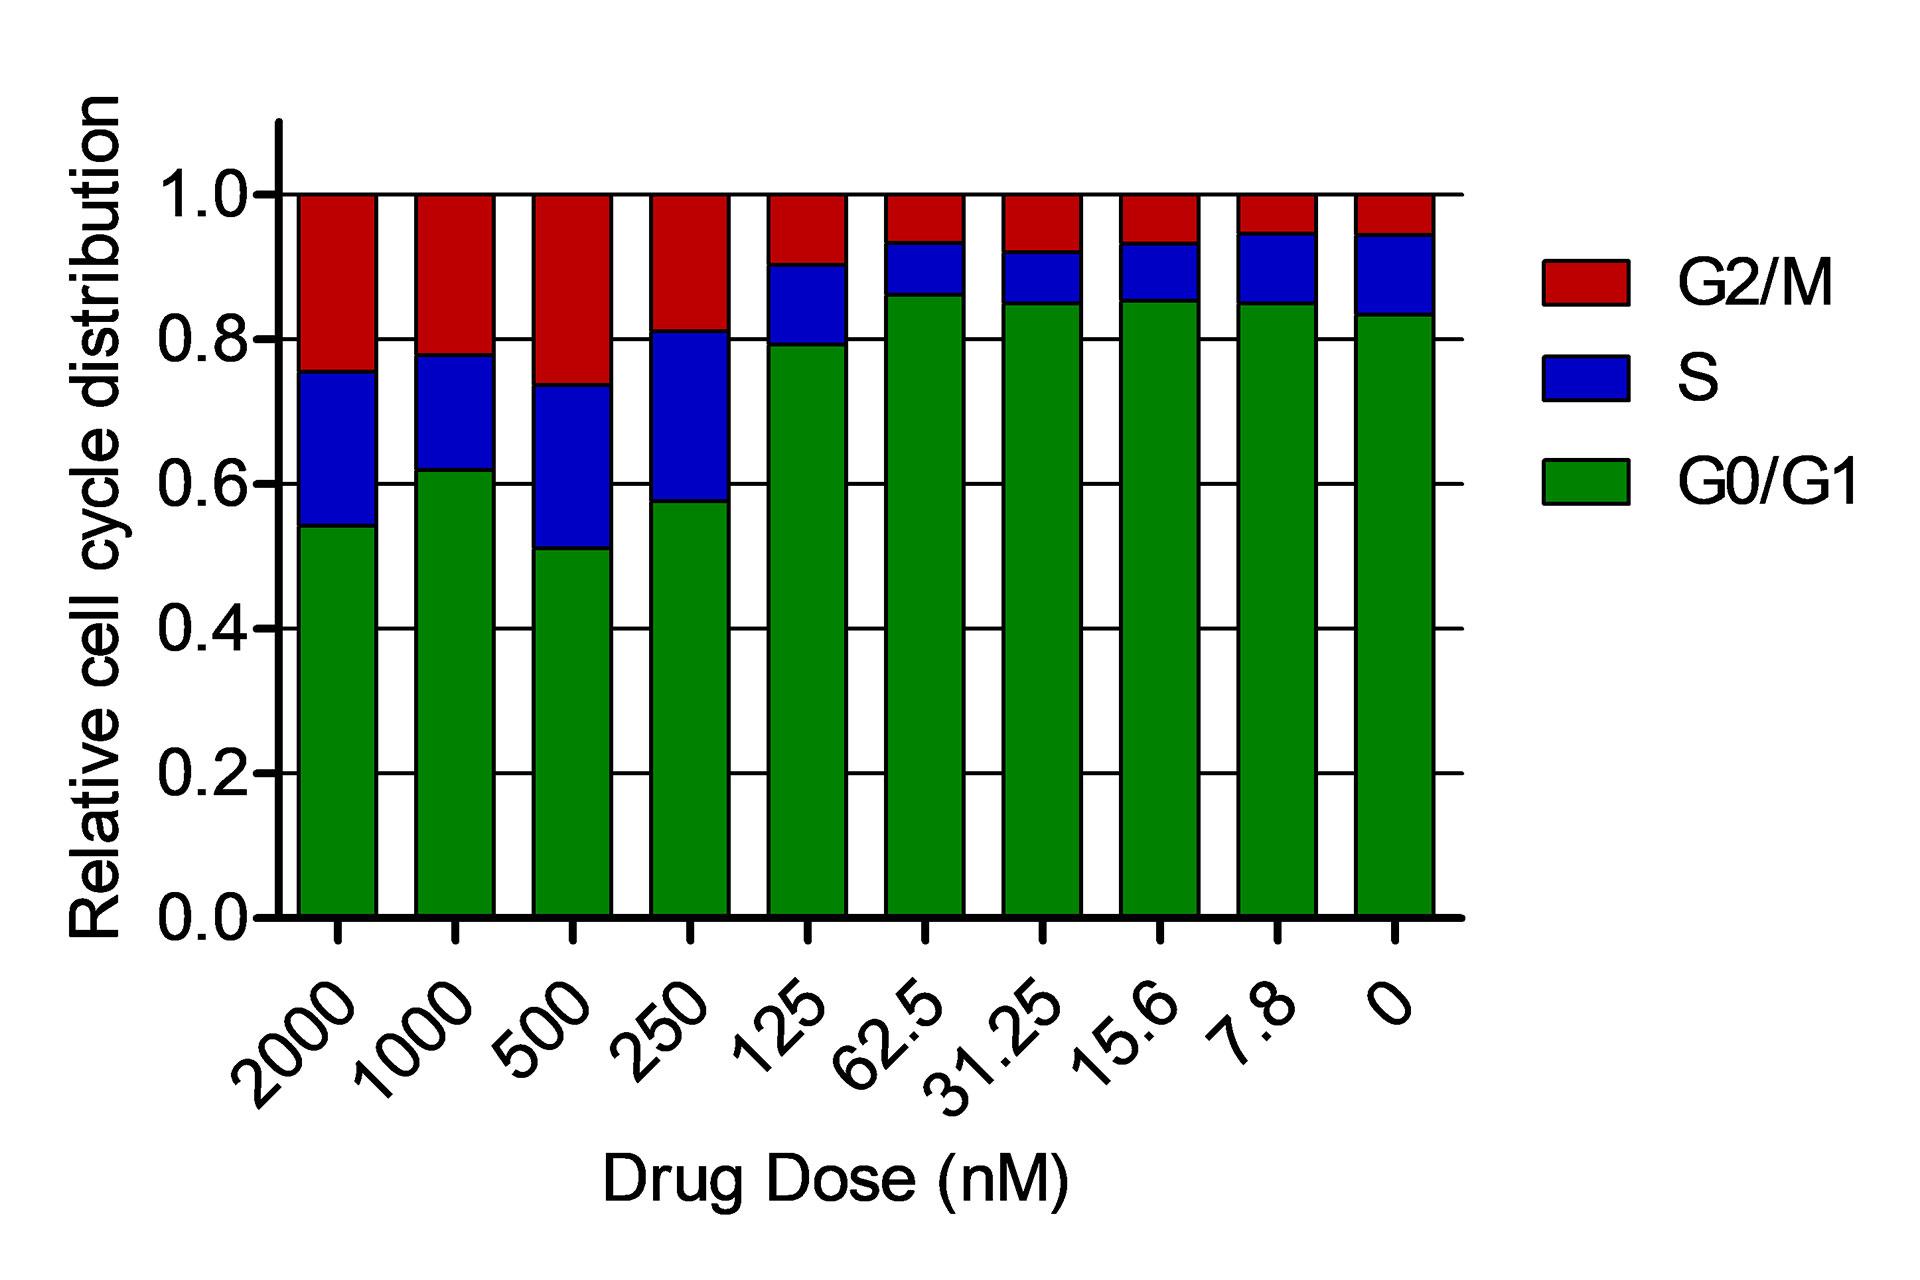 Relative cell-cycle distribution depending on drug dose